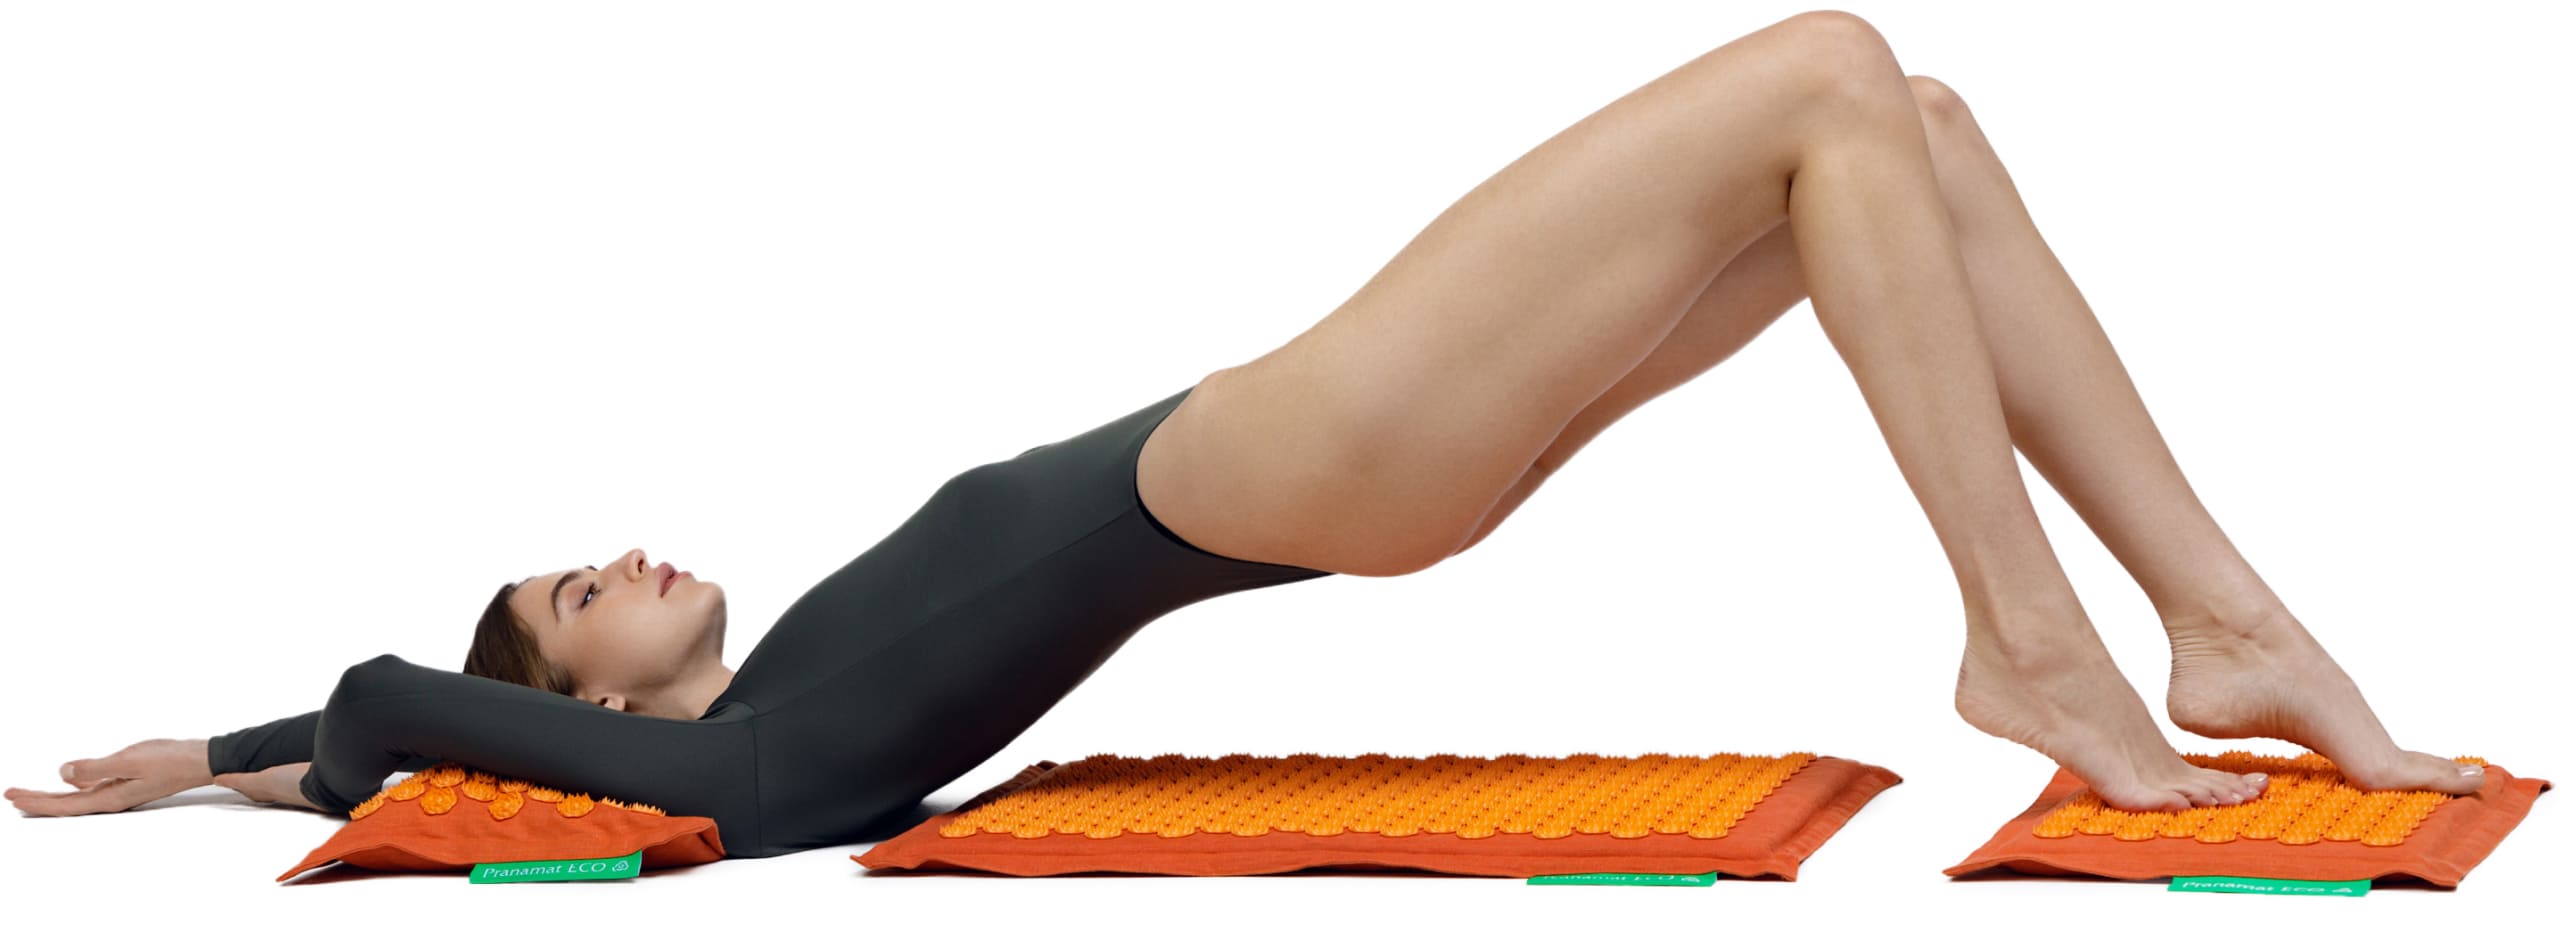 Pranamat ECO massage mat helps with back pain, fatigue, leg pain, and  overall tension » Gadget Flow